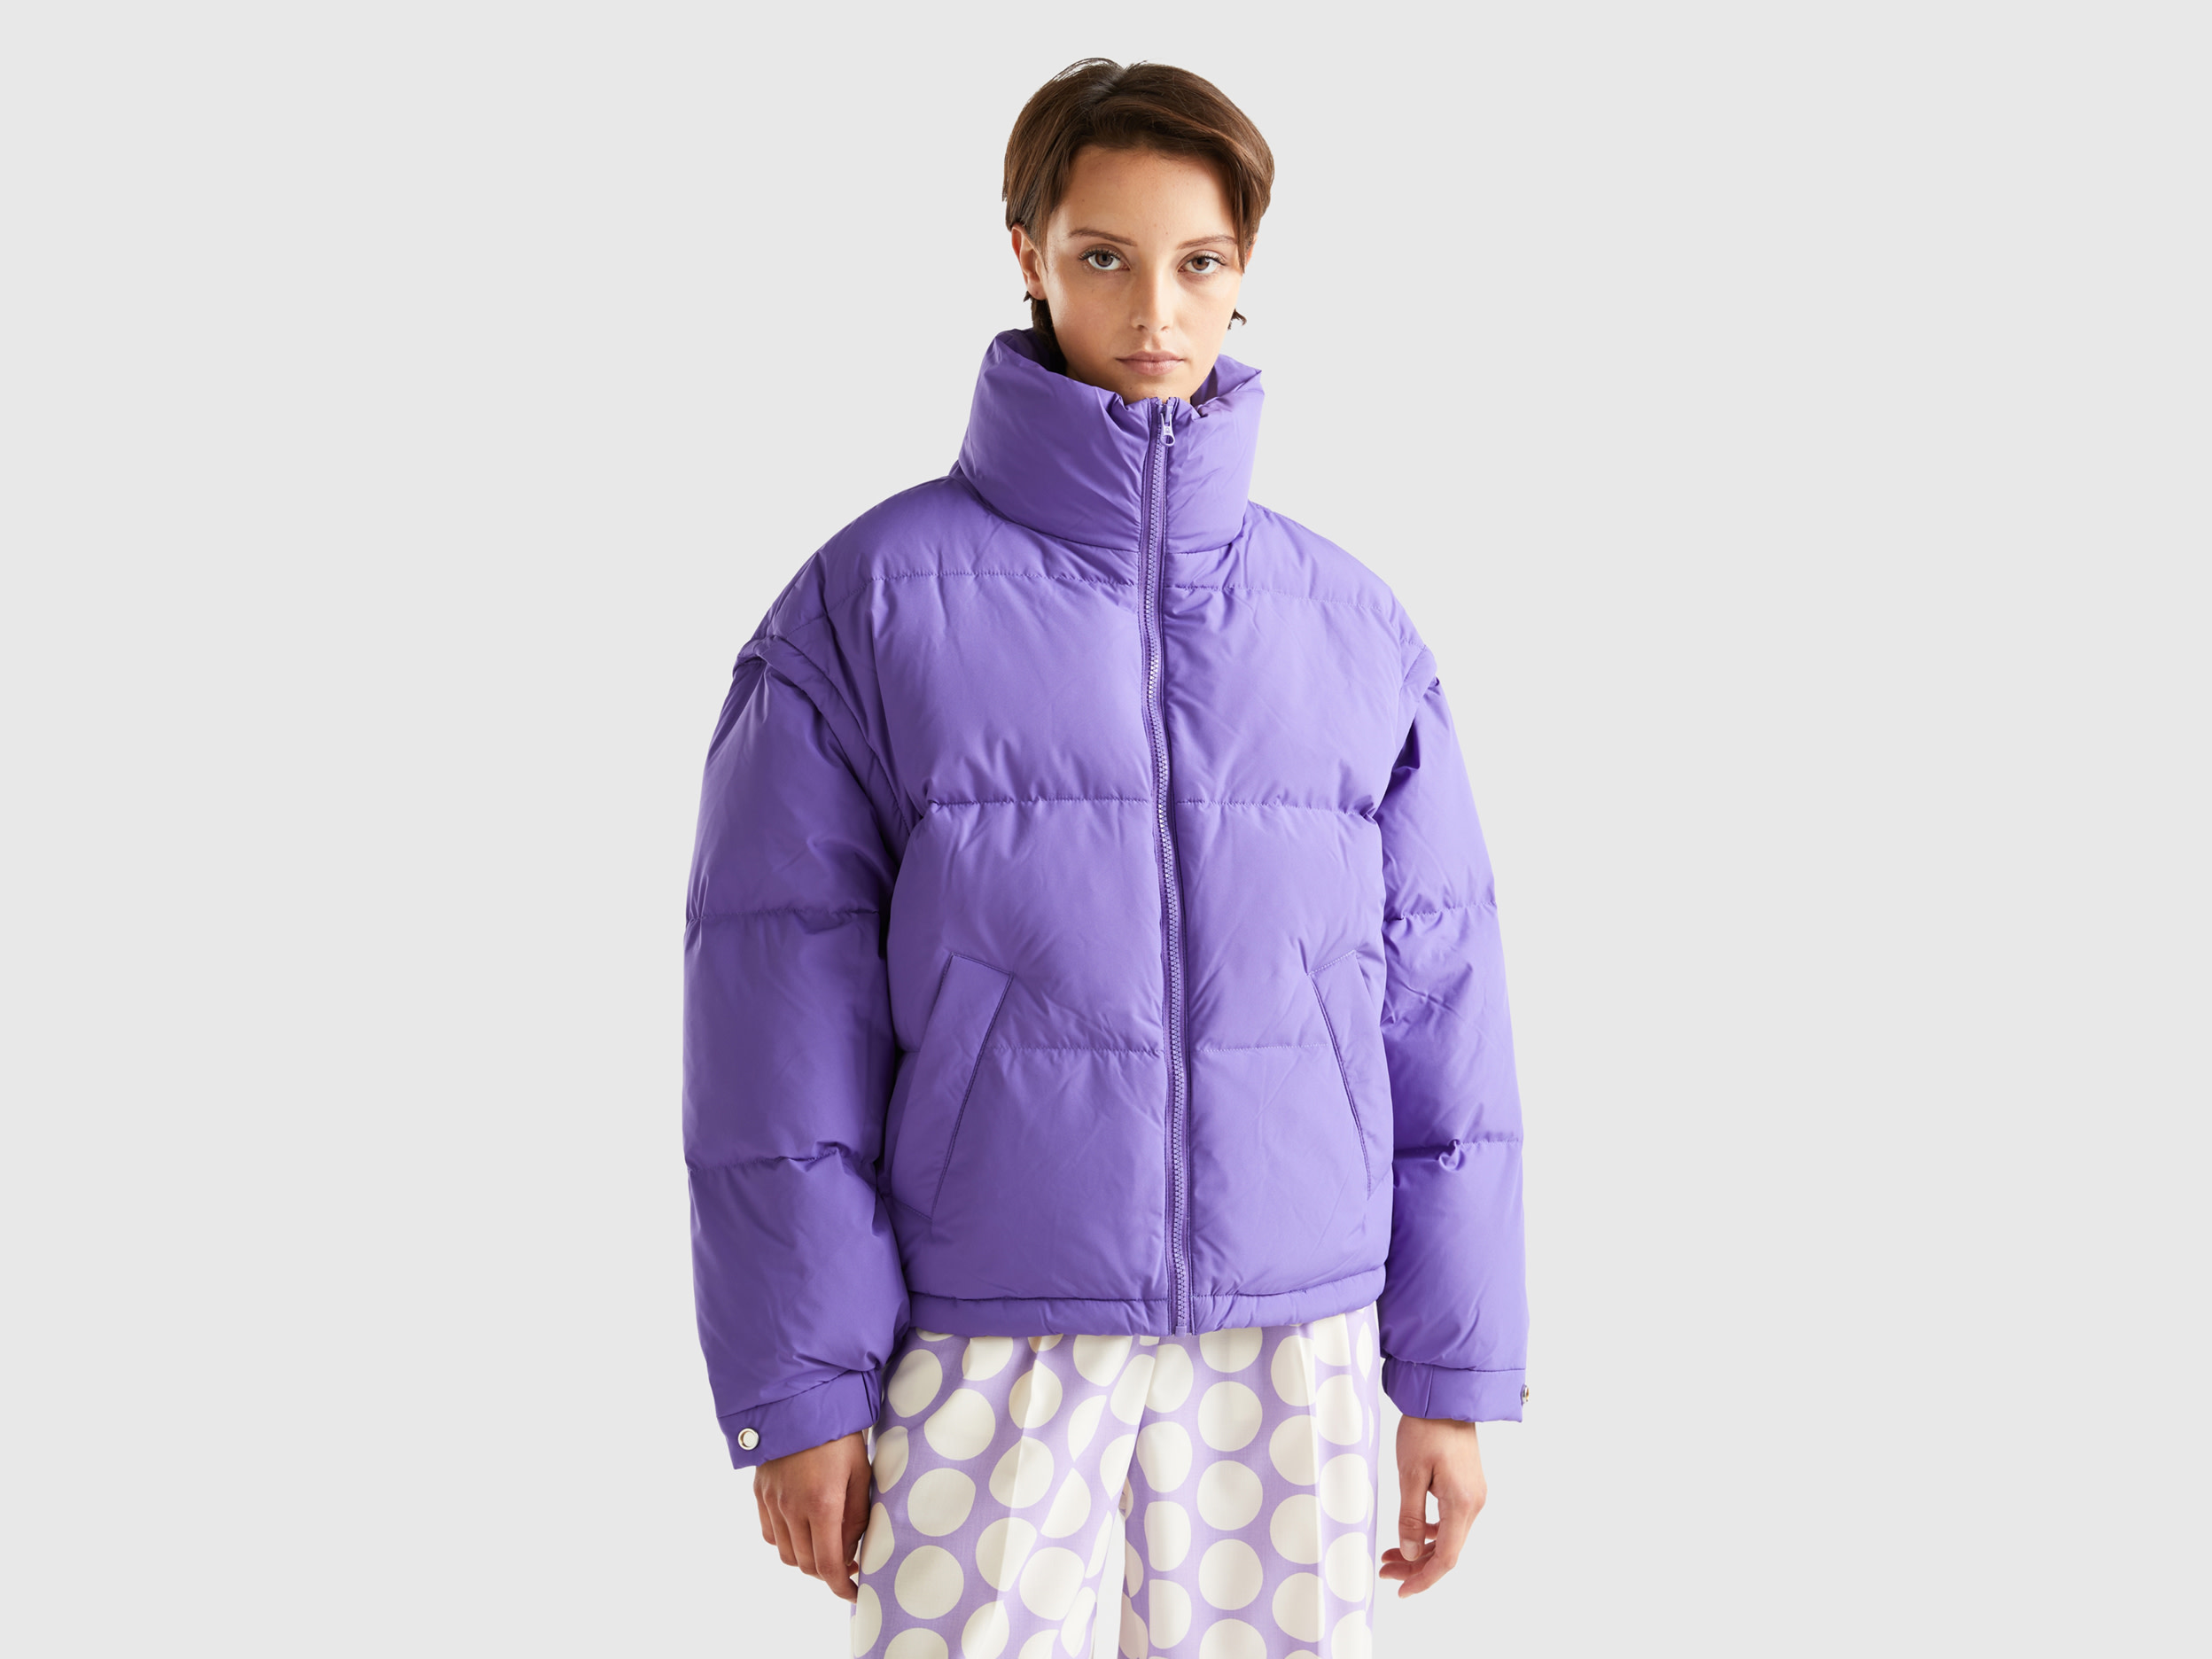 Benetton, Short Padded Jacket With Removable Sleeves, size XS, Violet, Women